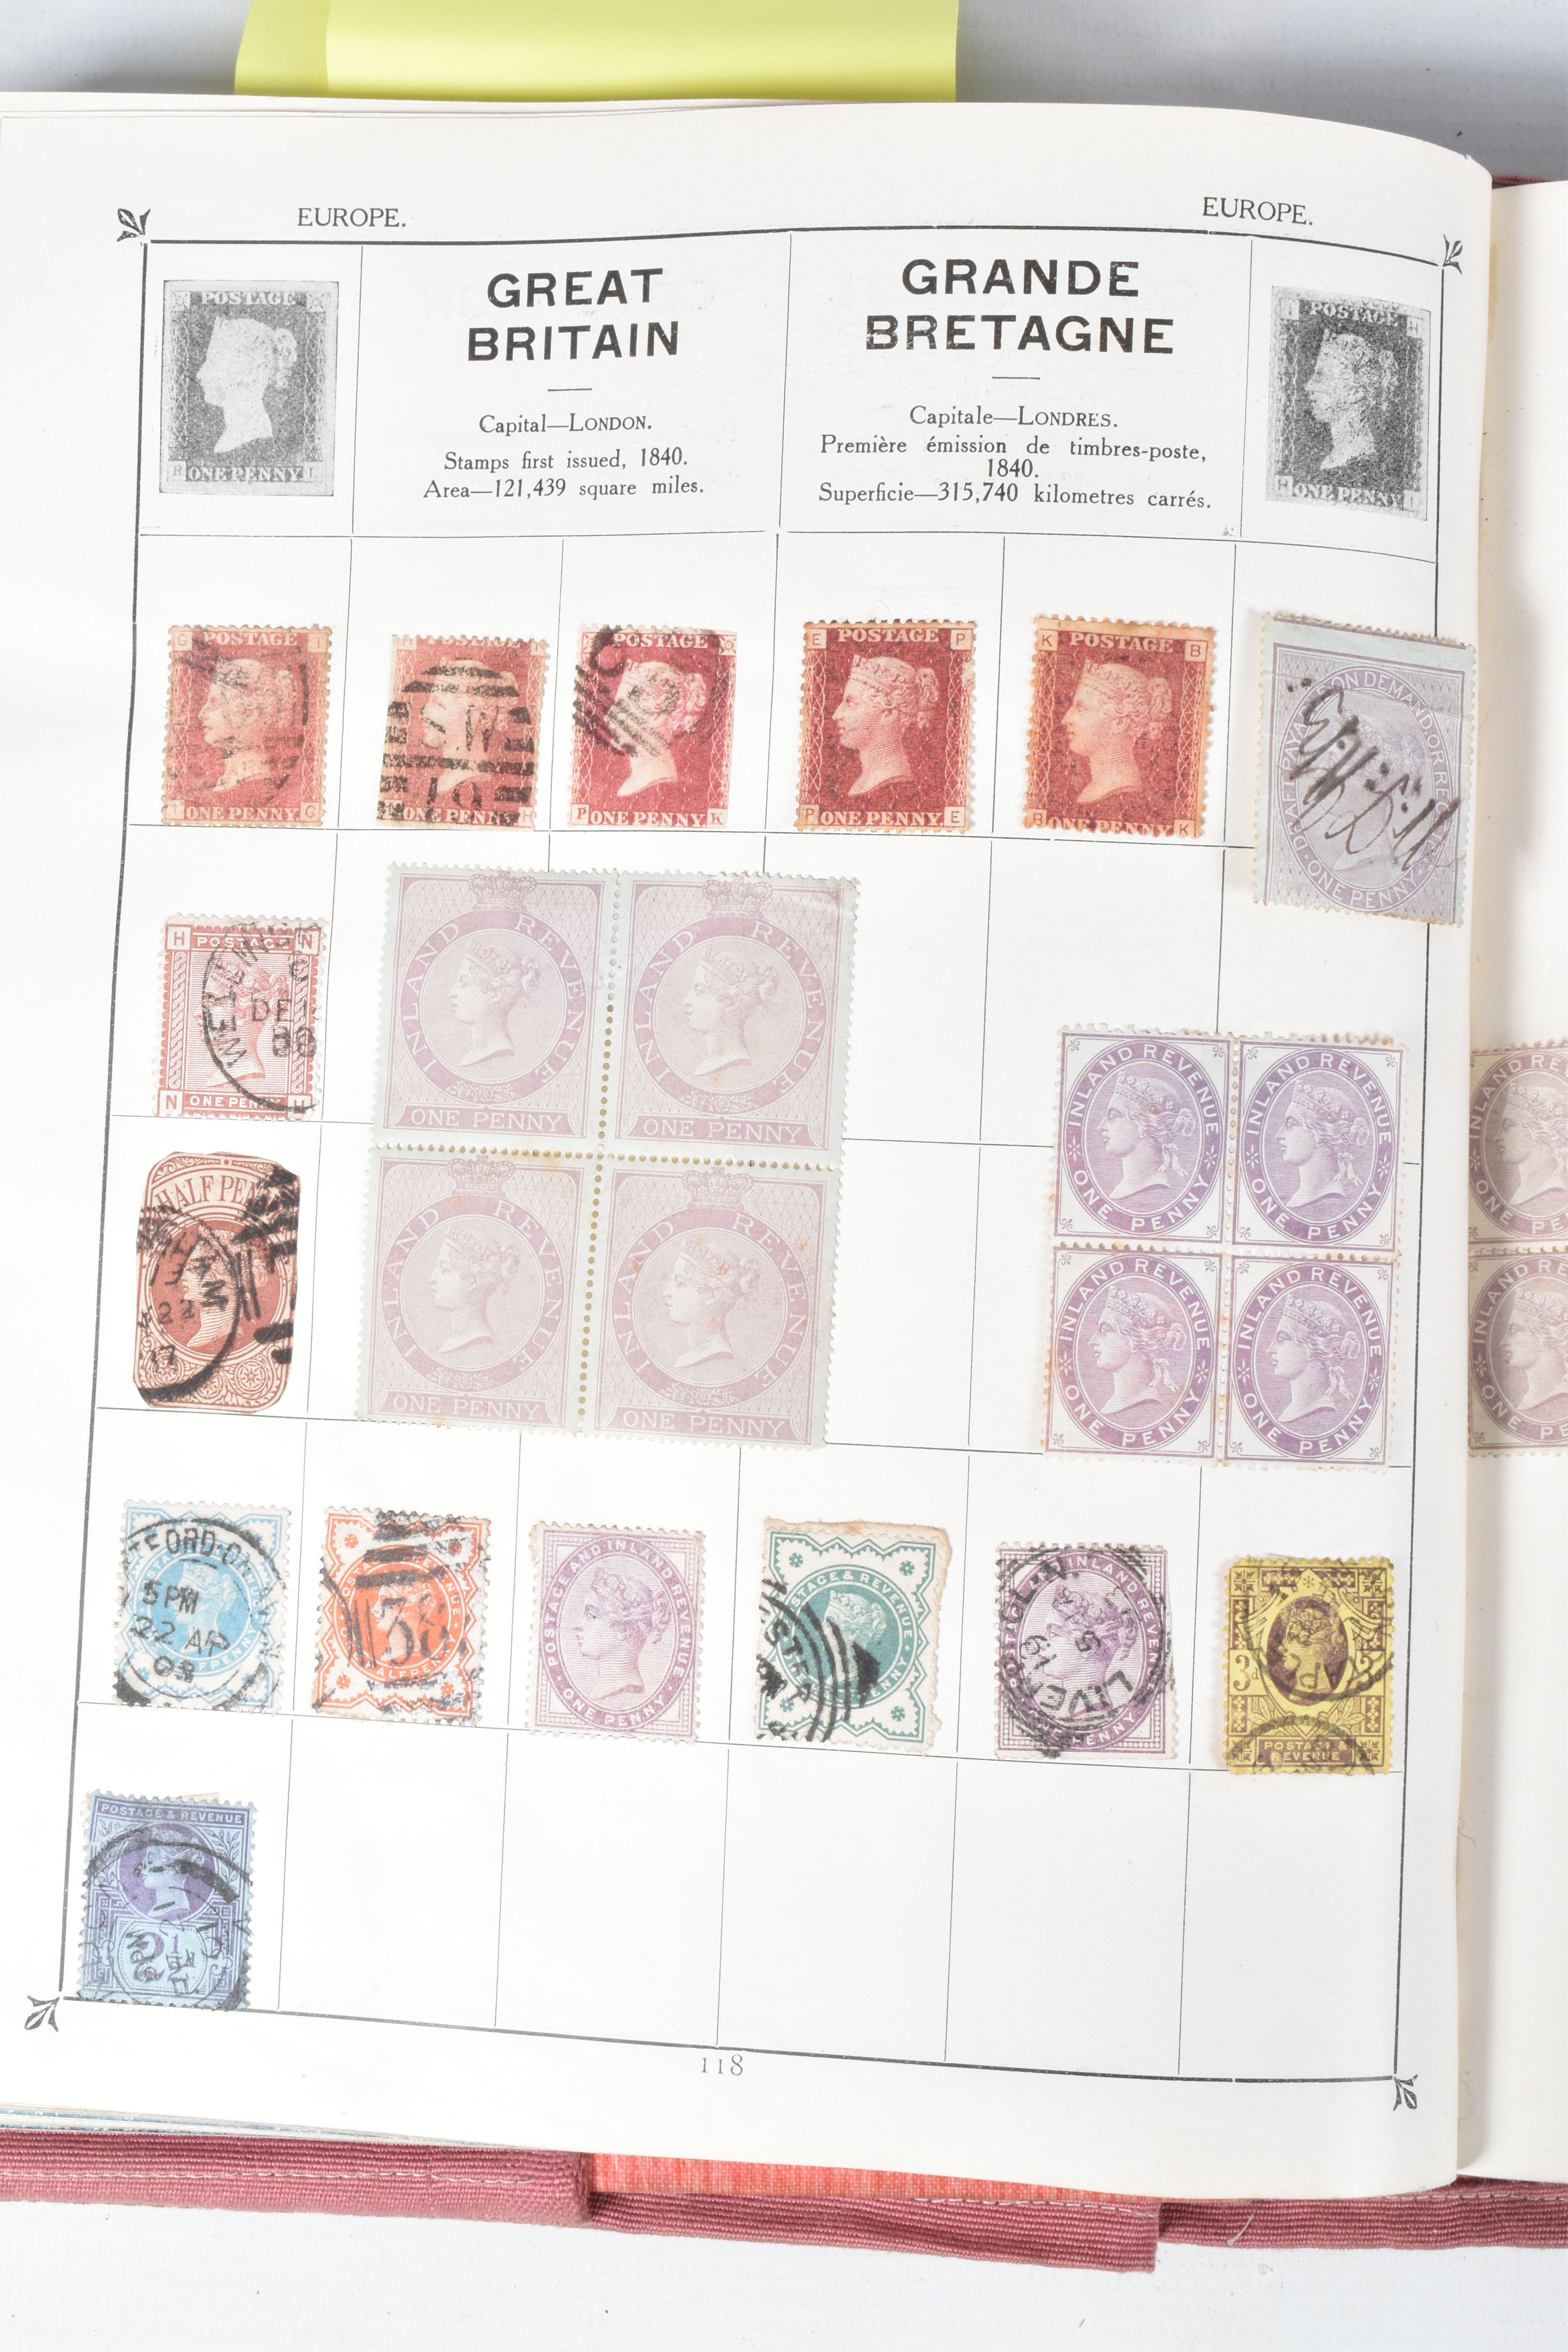 STAMP COLLECTION IN 2 SMALL CASES. We note 2 Strand type albums with multi-generation collectionm - Image 7 of 23